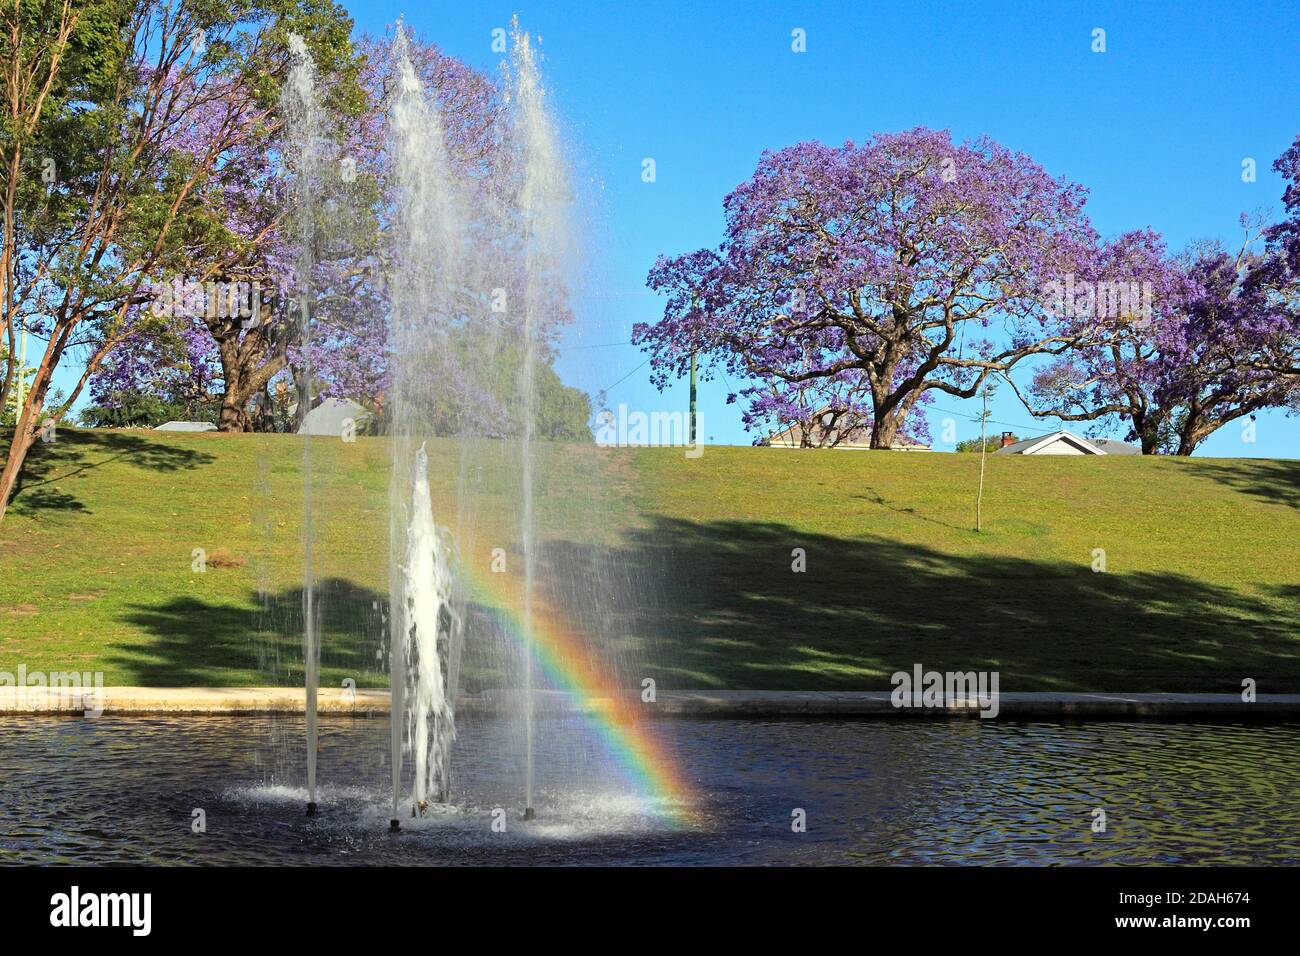 Fountain with Rainbow at See Park, Grafton, NSW, Australia. There are flowering jacaranda trees in the background. Stock Photo